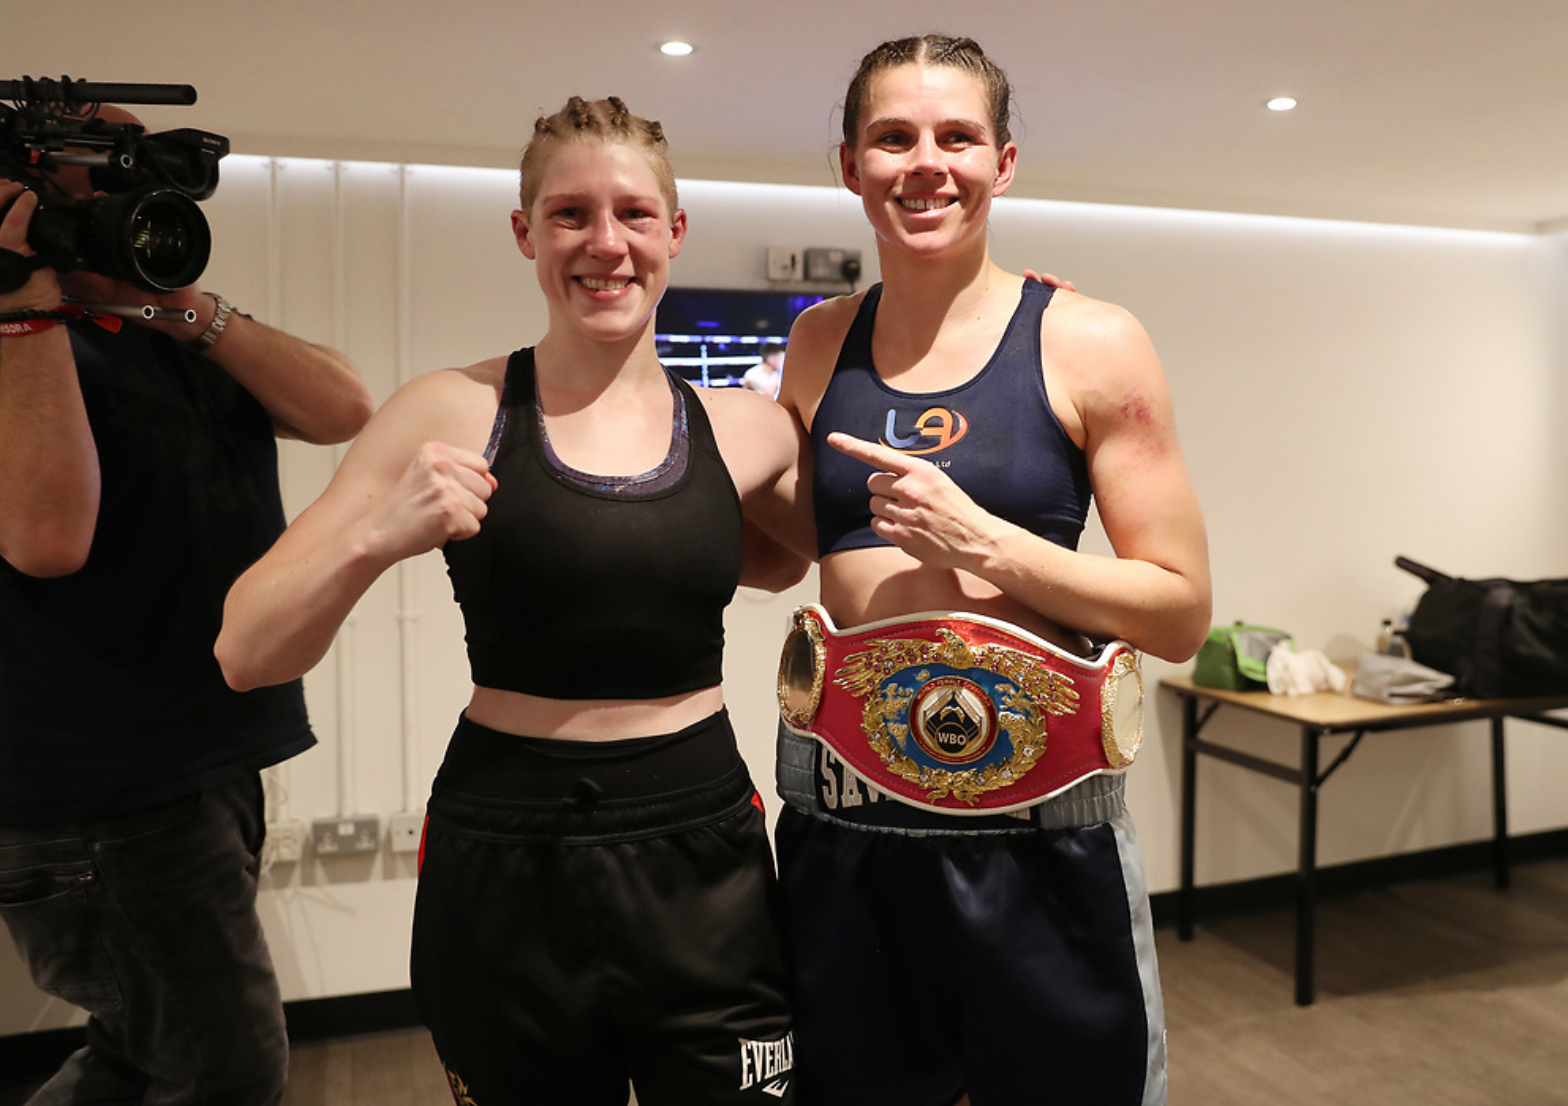 Marshall beat Hannah Rankin to claim the WBO middleweight title in October